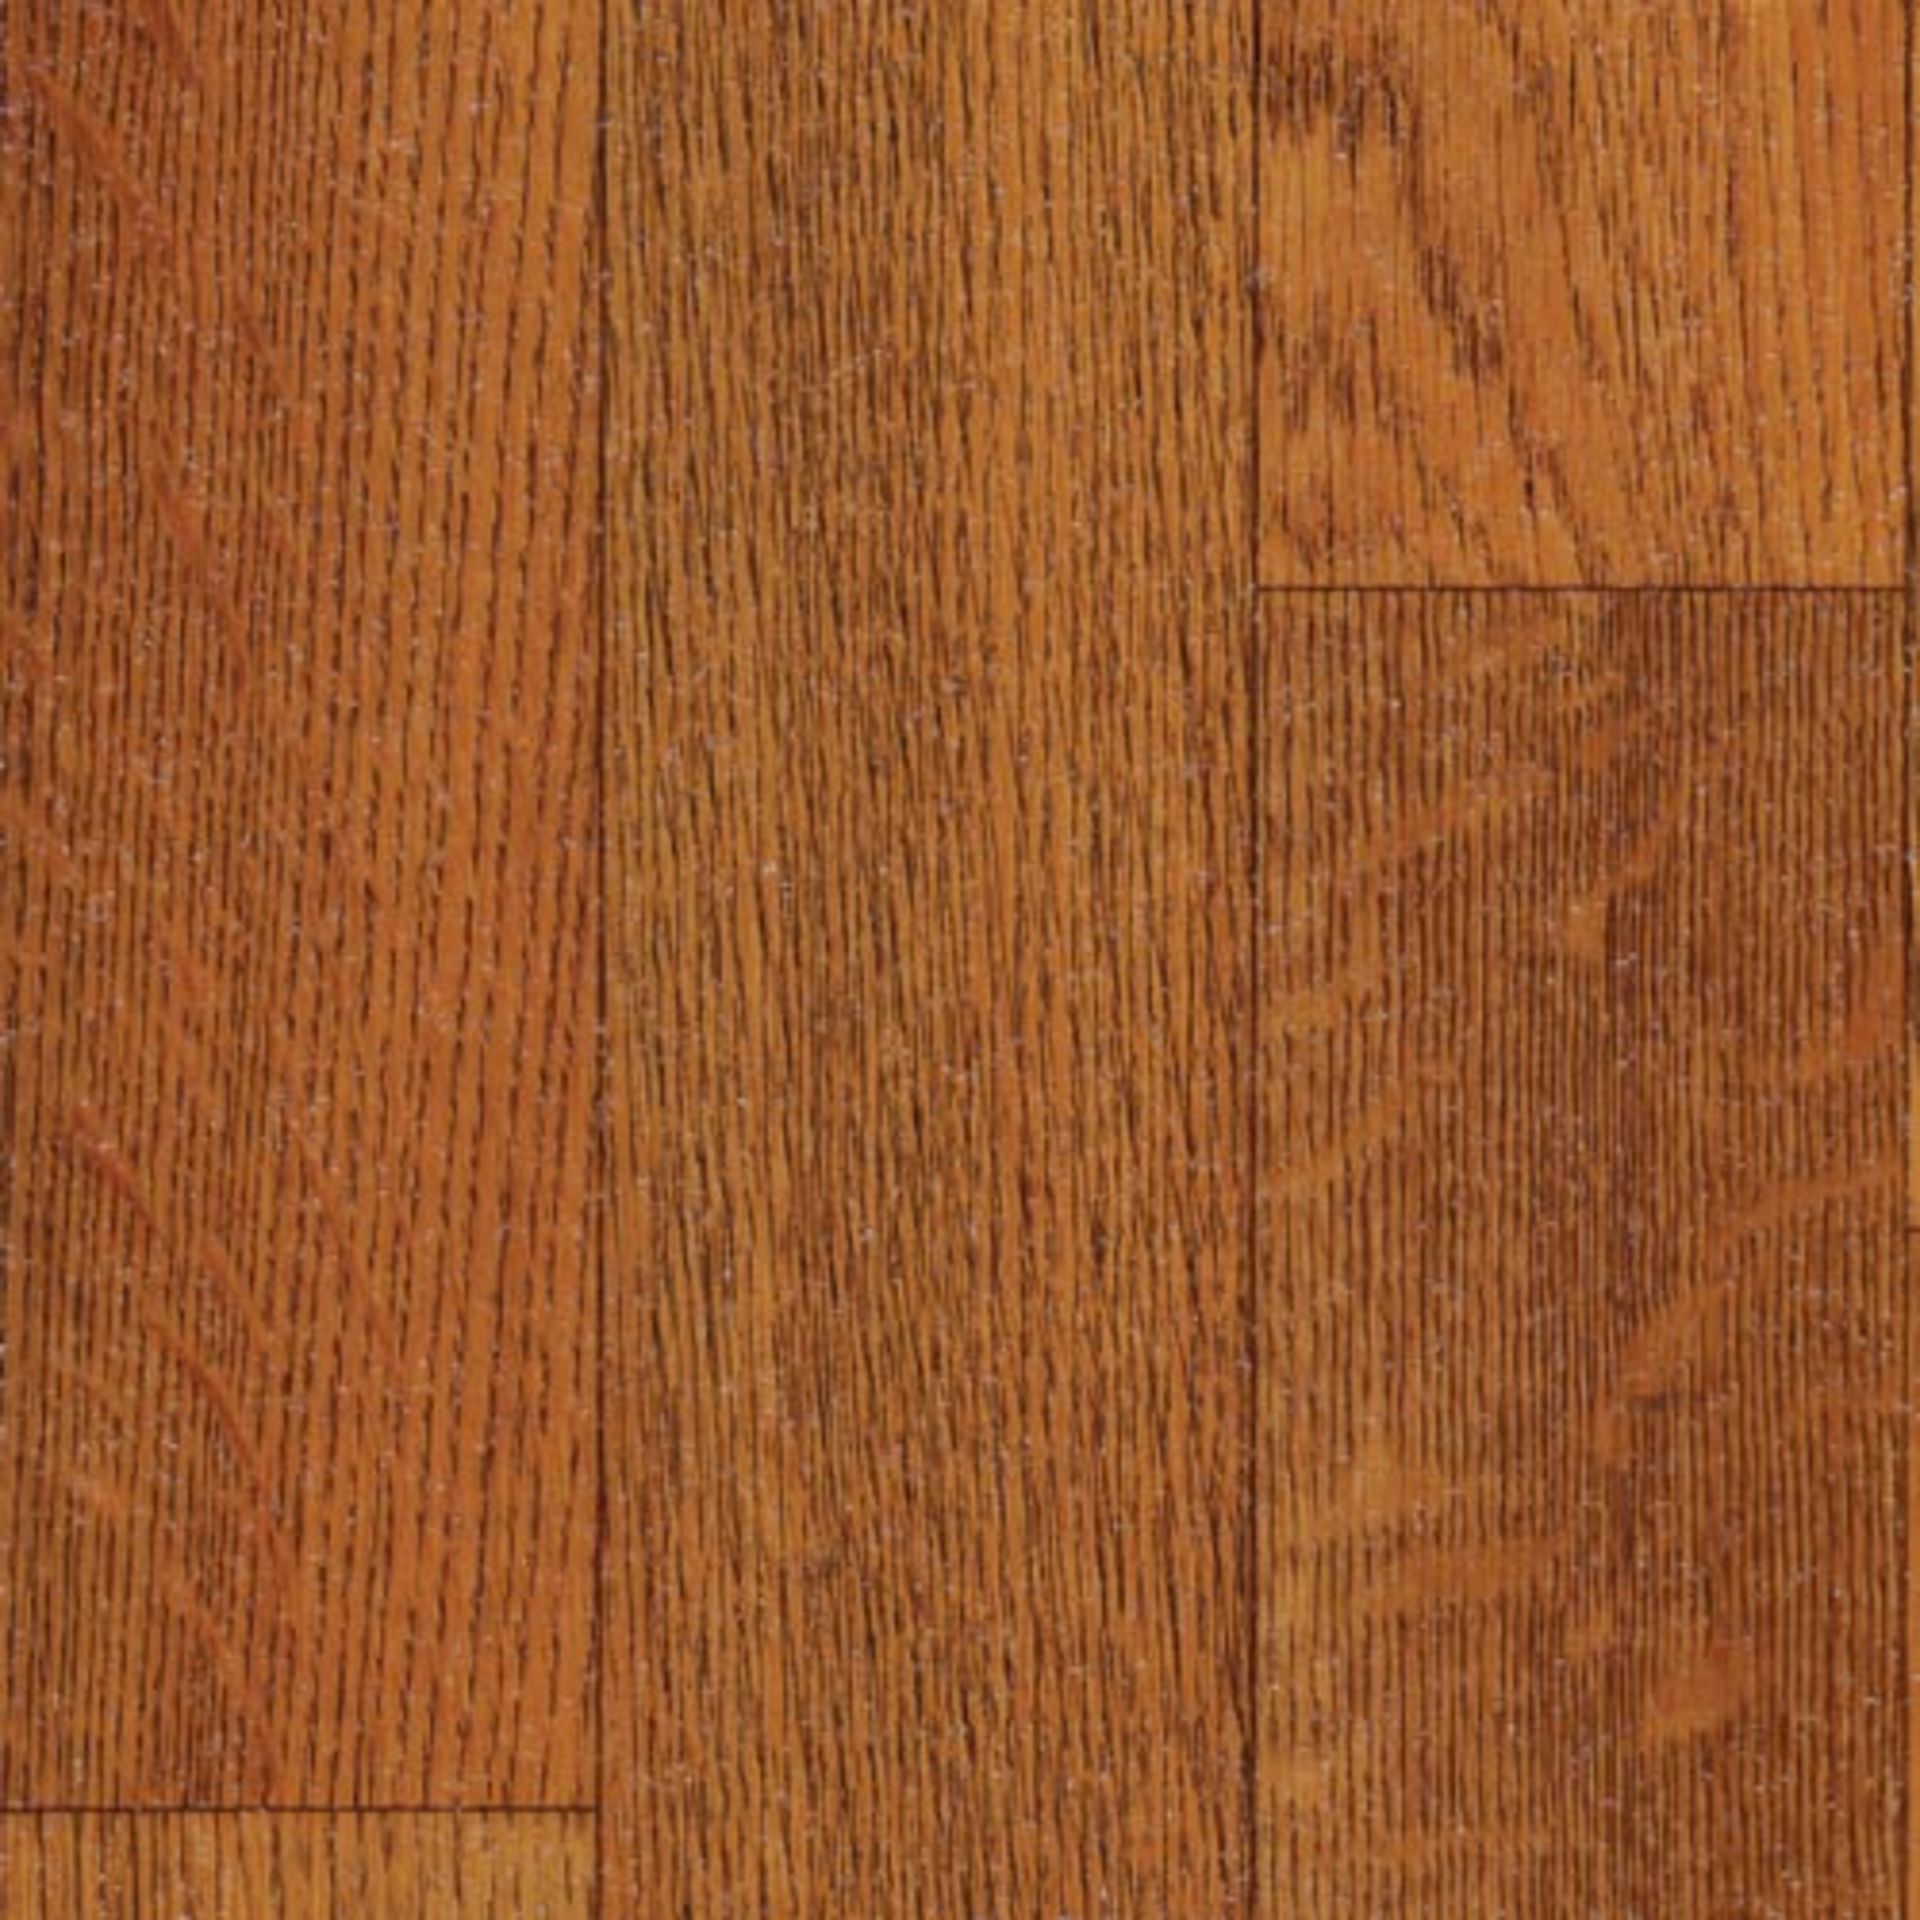 Tarkett Wood - Trend Oak Brown The Safetred Design family allows specifiers and end users to